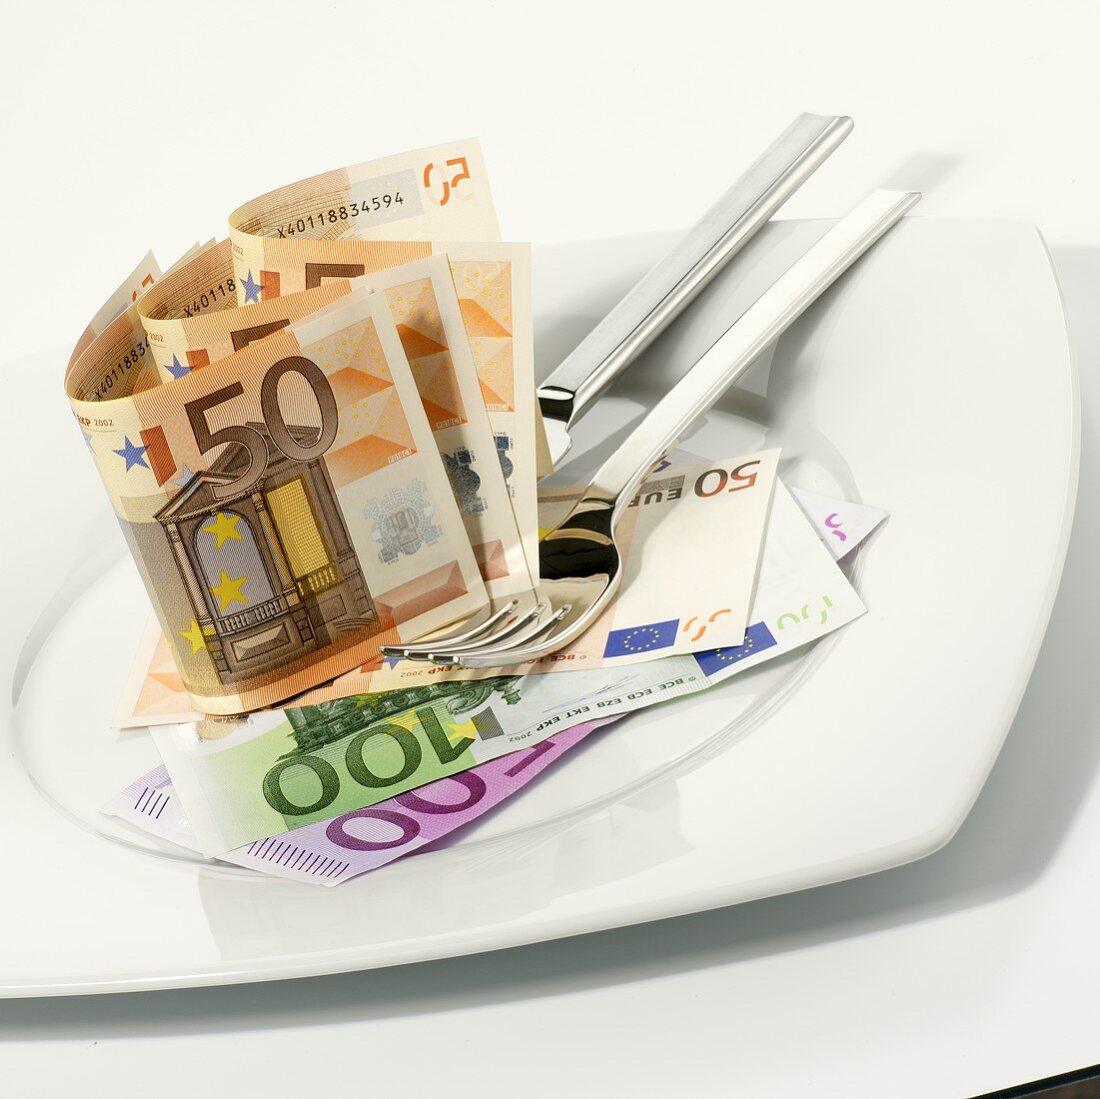 Euro notes on plate with knife and fork